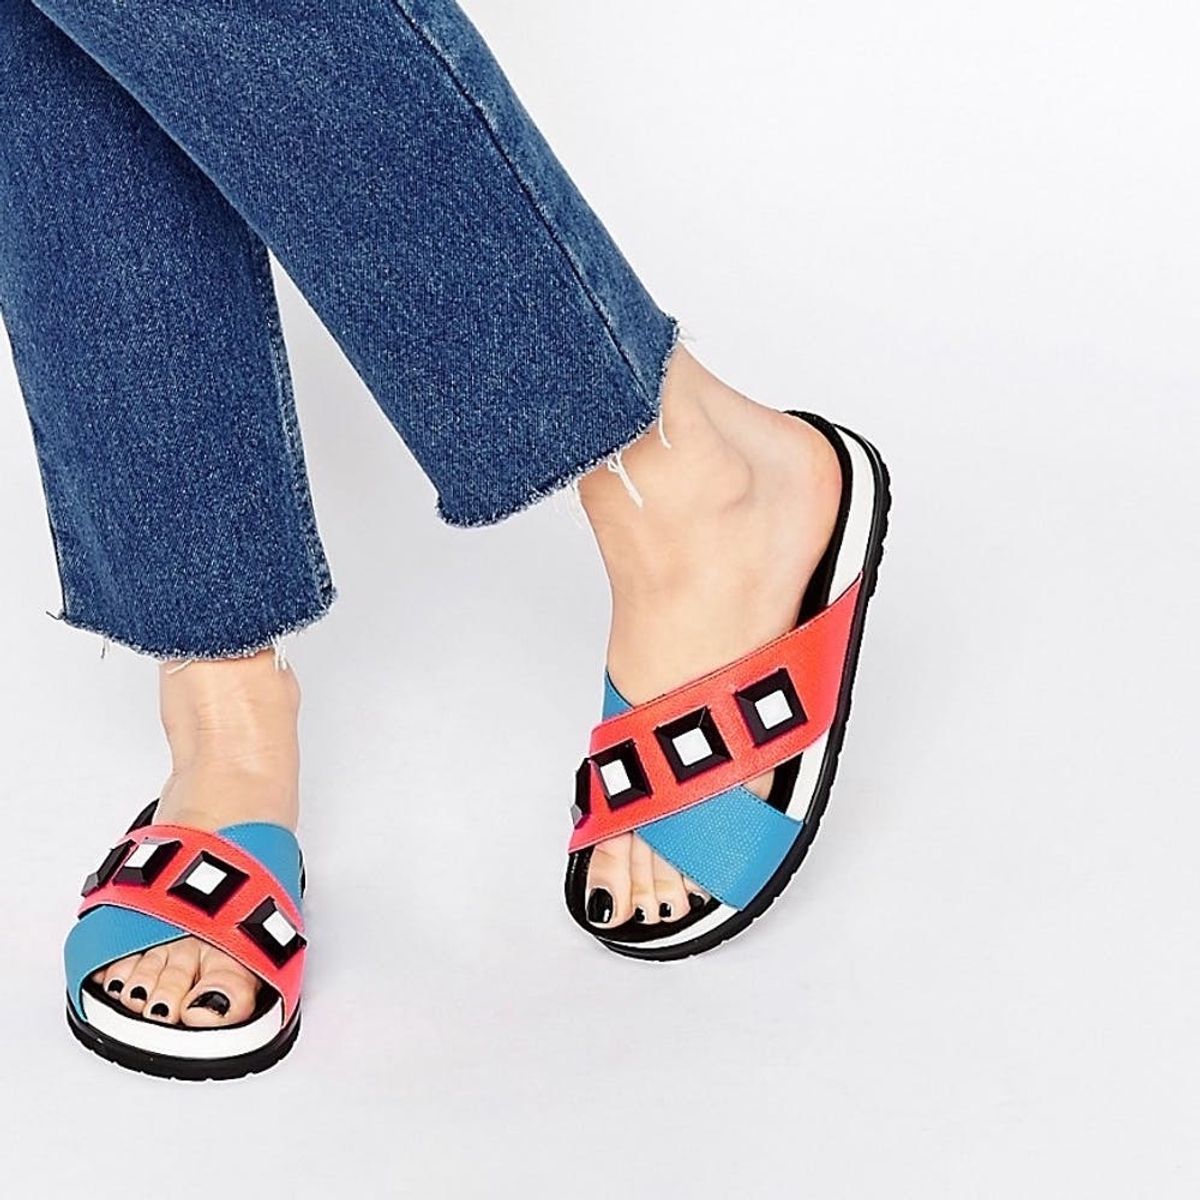 13 Pairs of Slides Perfect for the Pool and Beyond